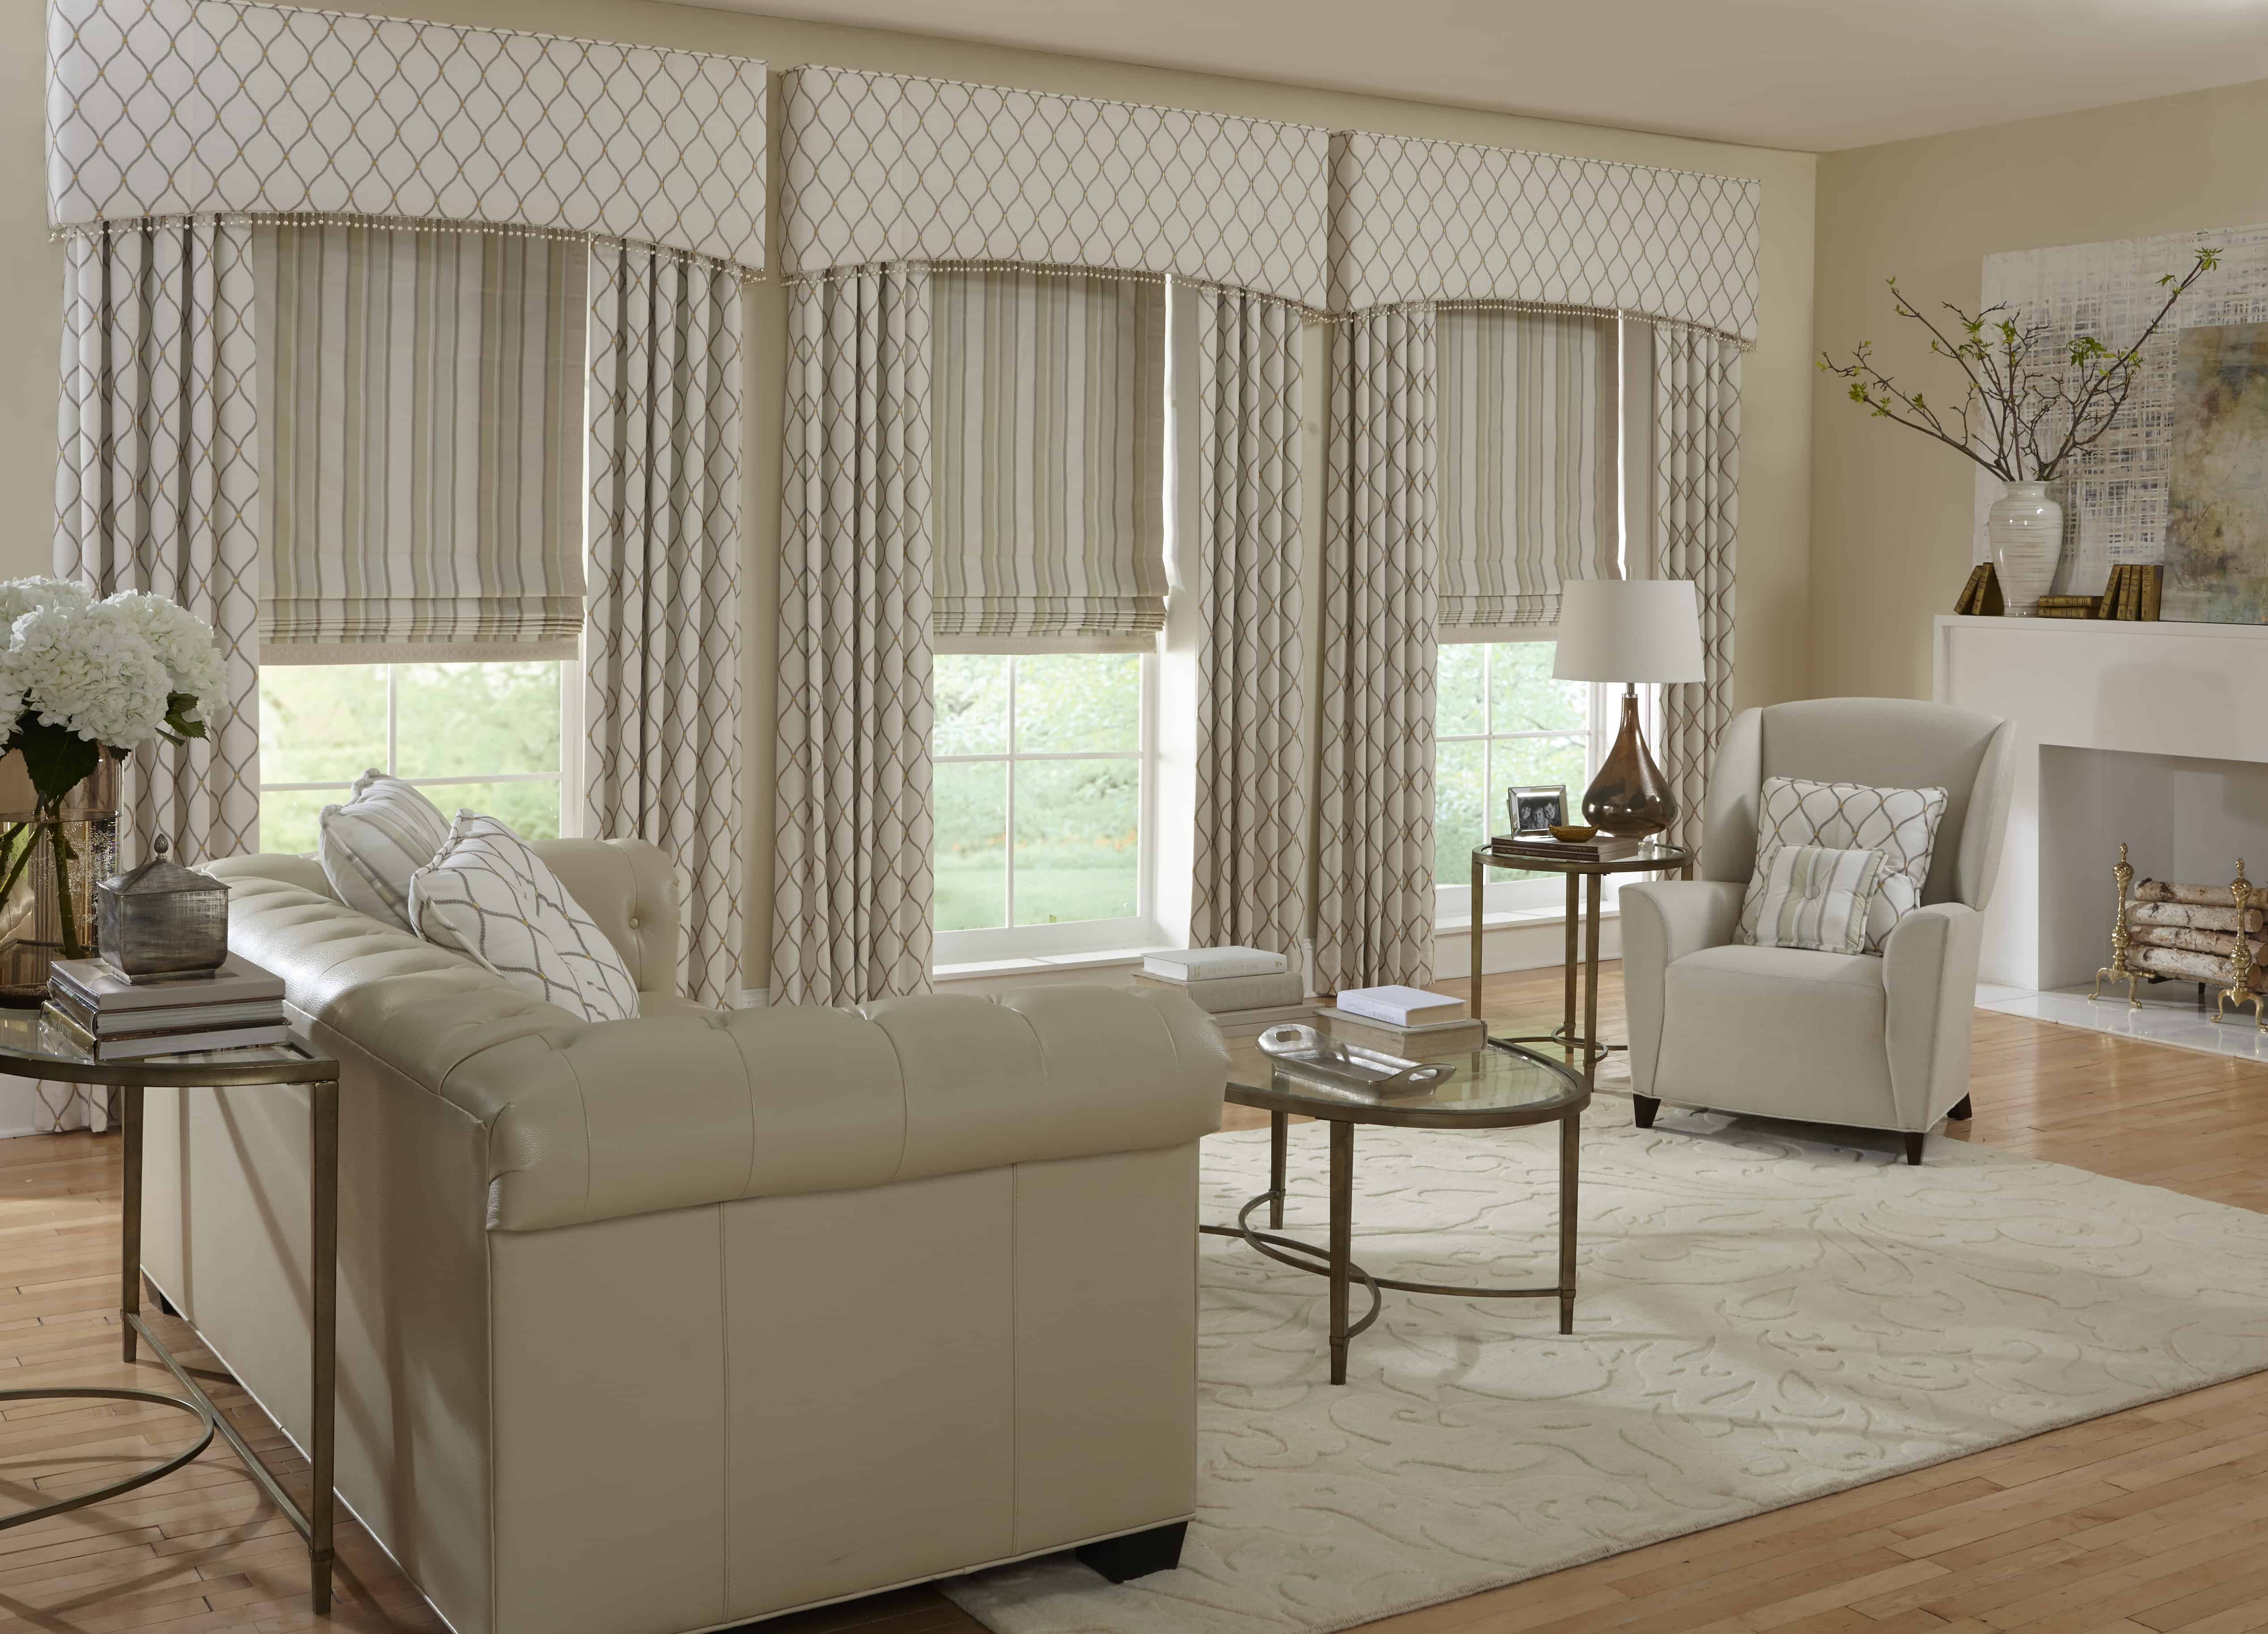 upscale window treatments in formal setting